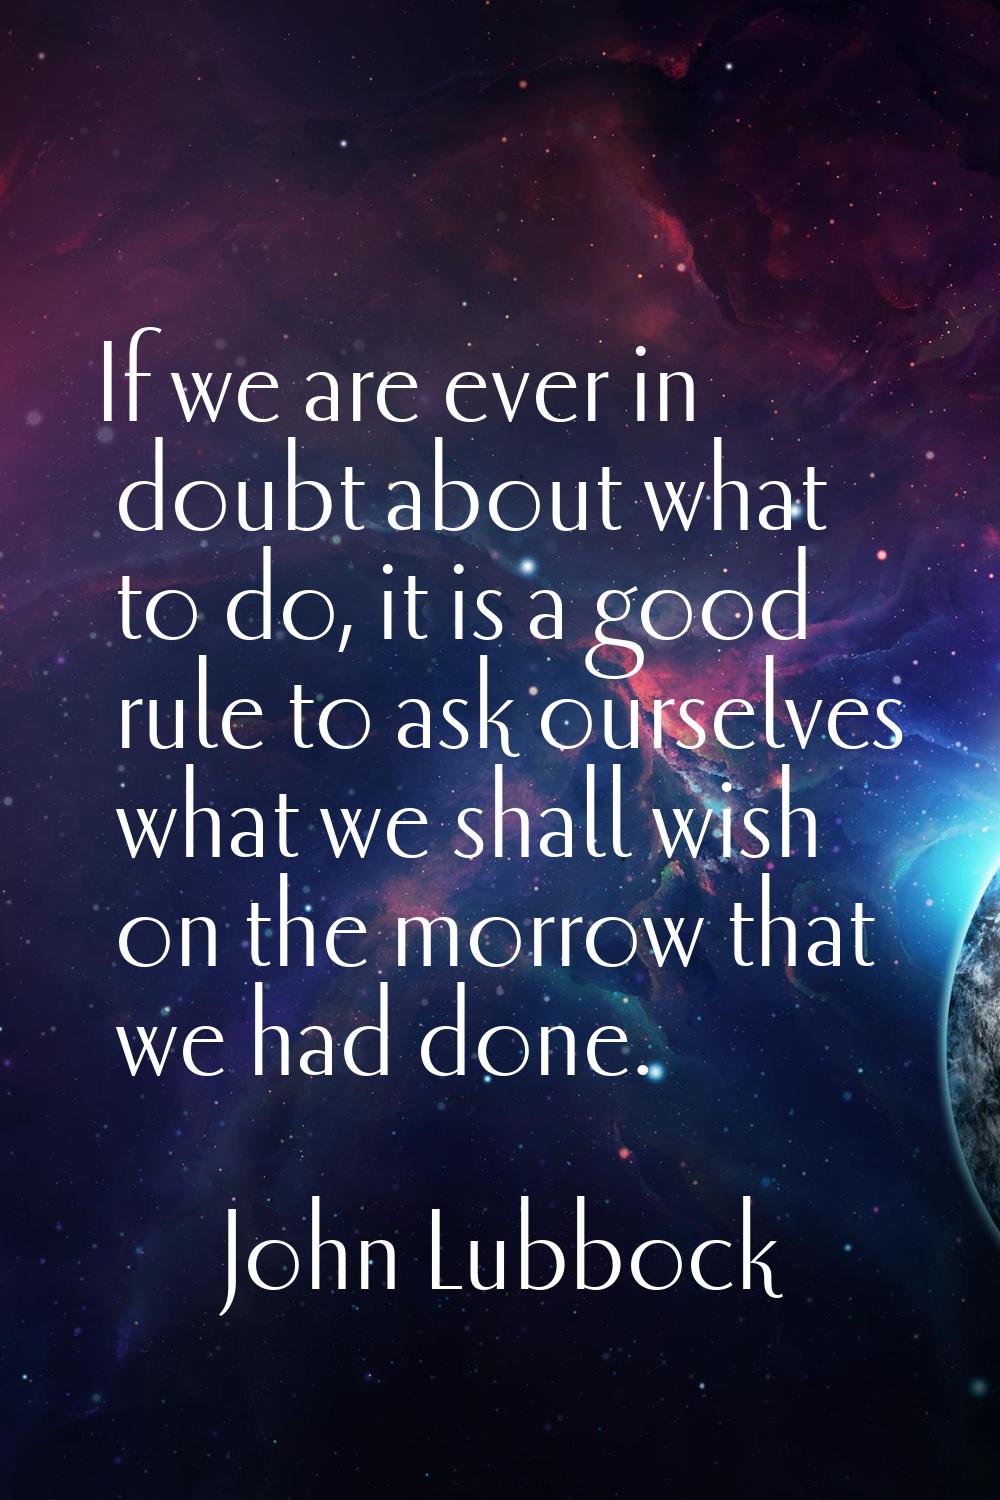 If we are ever in doubt about what to do, it is a good rule to ask ourselves what we shall wish on 